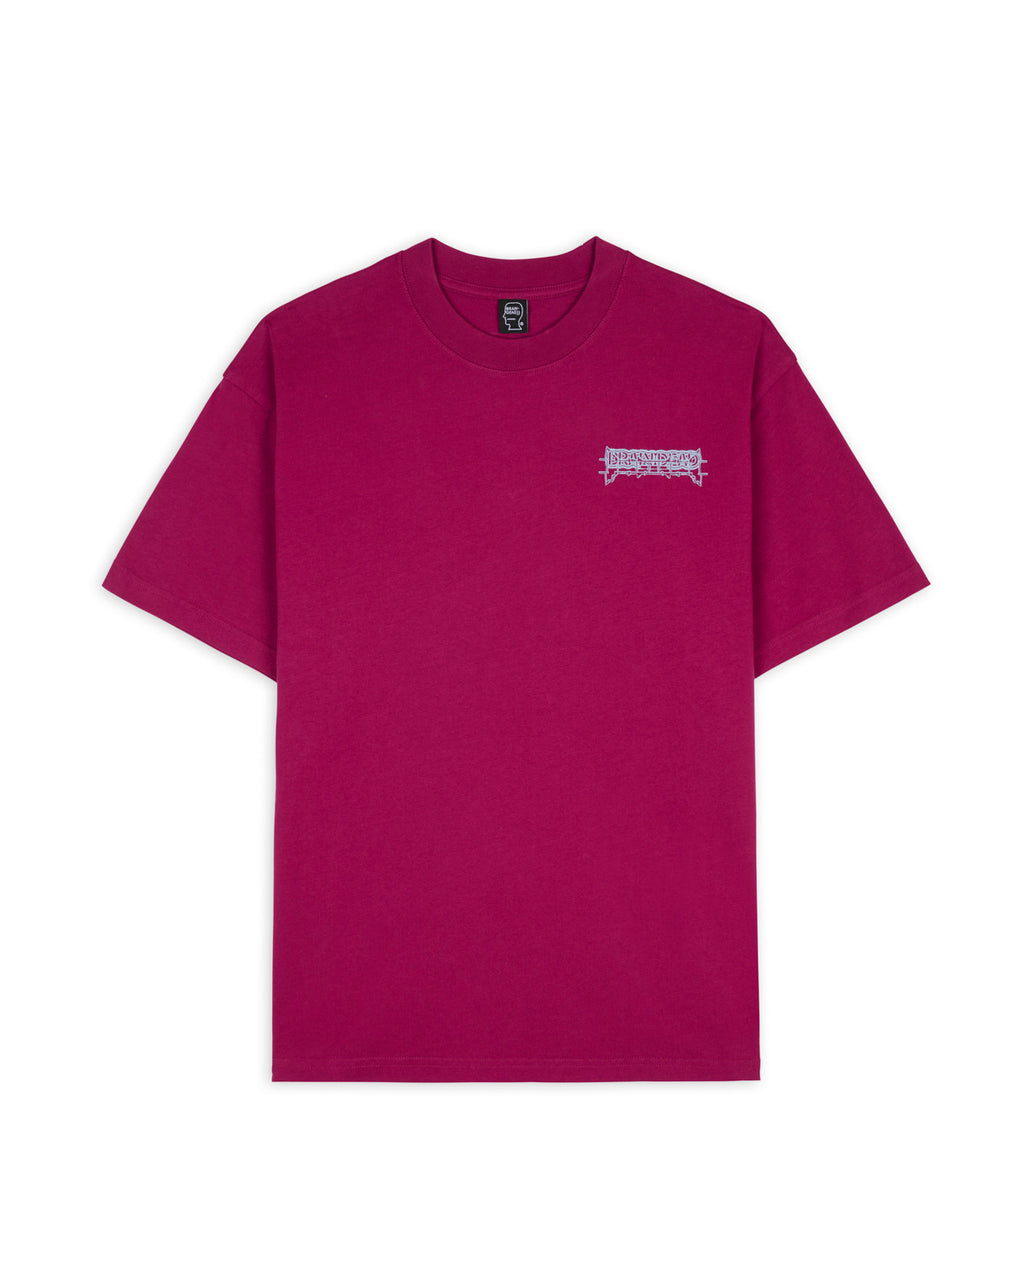 Helicopter T-Shirt - Maroon 1